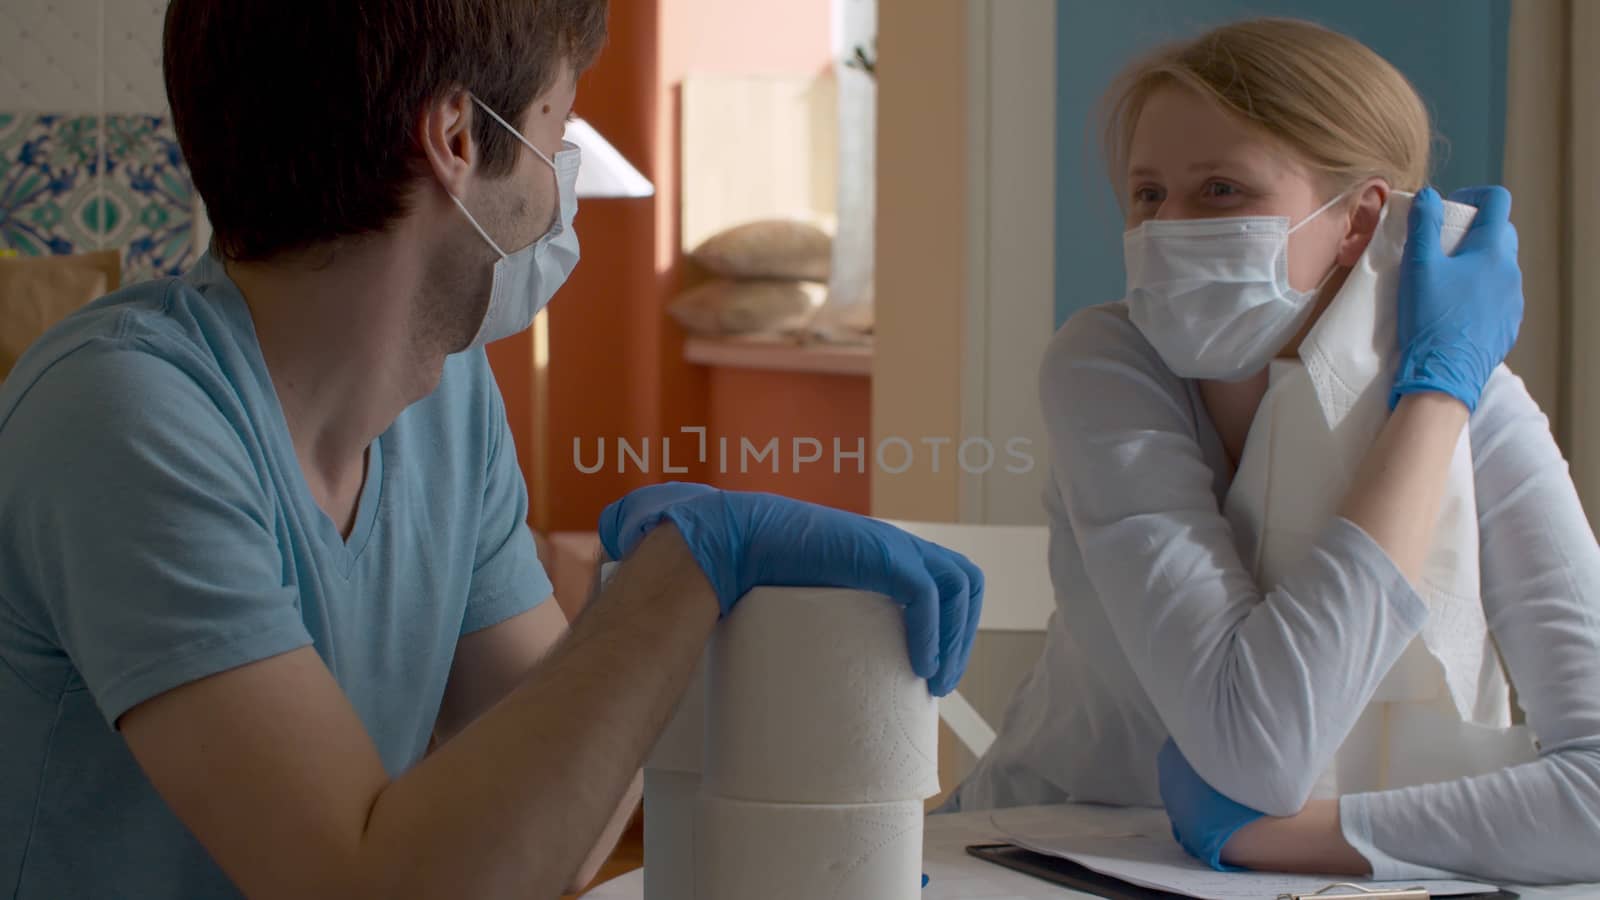 Happy family talking in bright kitchen. Wife hugging toilet paper, smiling and telling something. Husband listening to her. Coronavirus epidemic, quarantine. Covid-19 pandemic